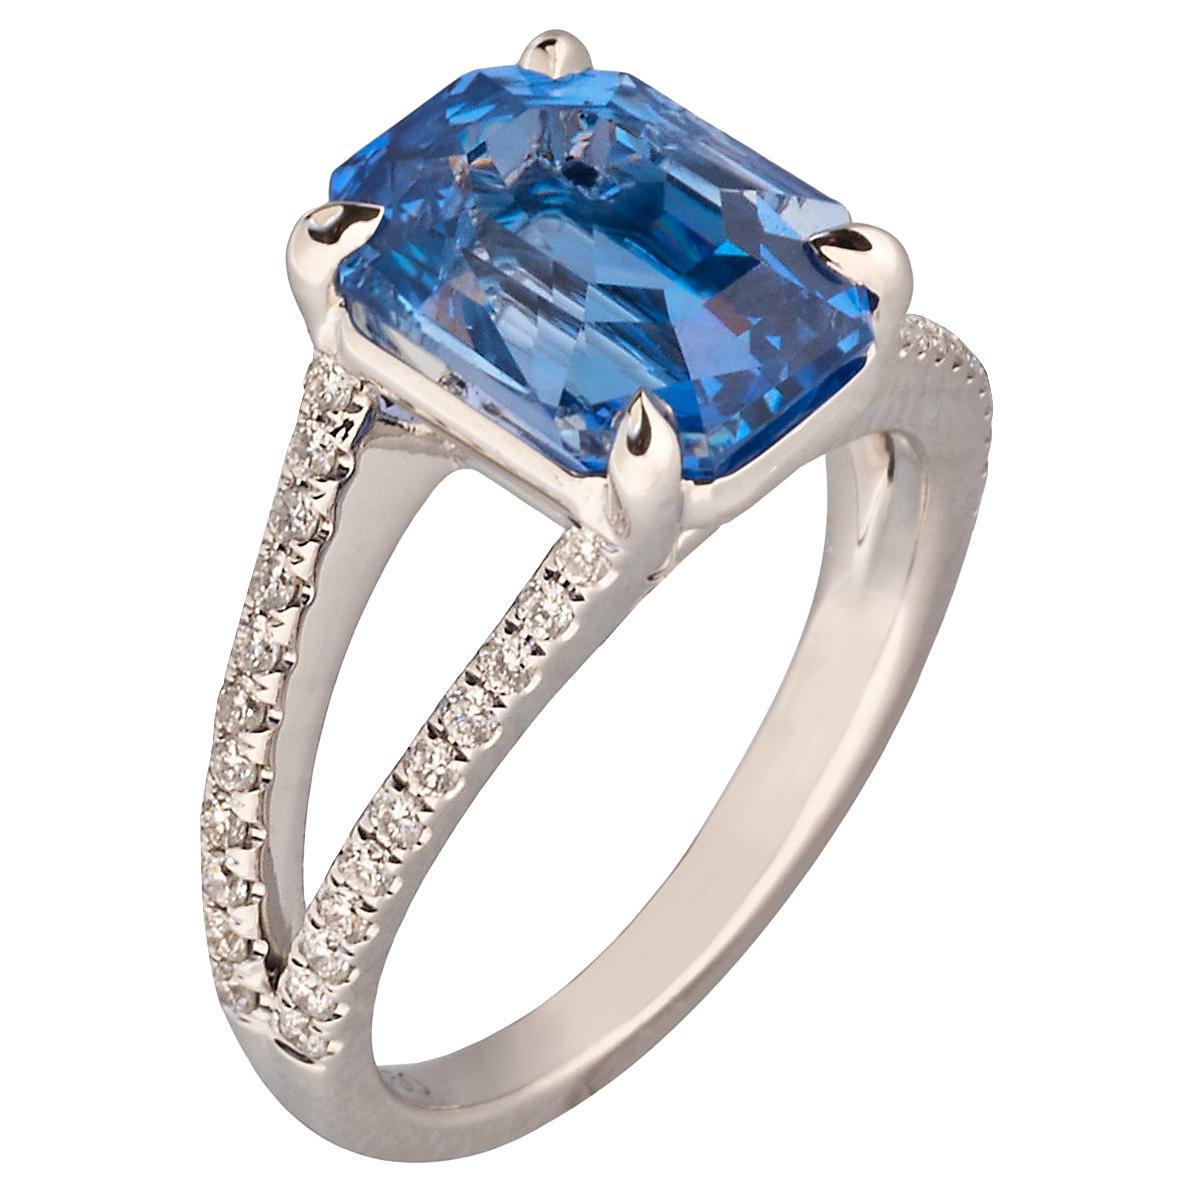 Centering on a rectangular emerald-cut sapphire of 5.29 carats with 44 round diamonds embellishing the 18K white gold shank. 

Size 5-1/4, can be resized   
2021 AGL report no. 1116075, of Ceylon origin, no gemological evidence of heat, no clarity